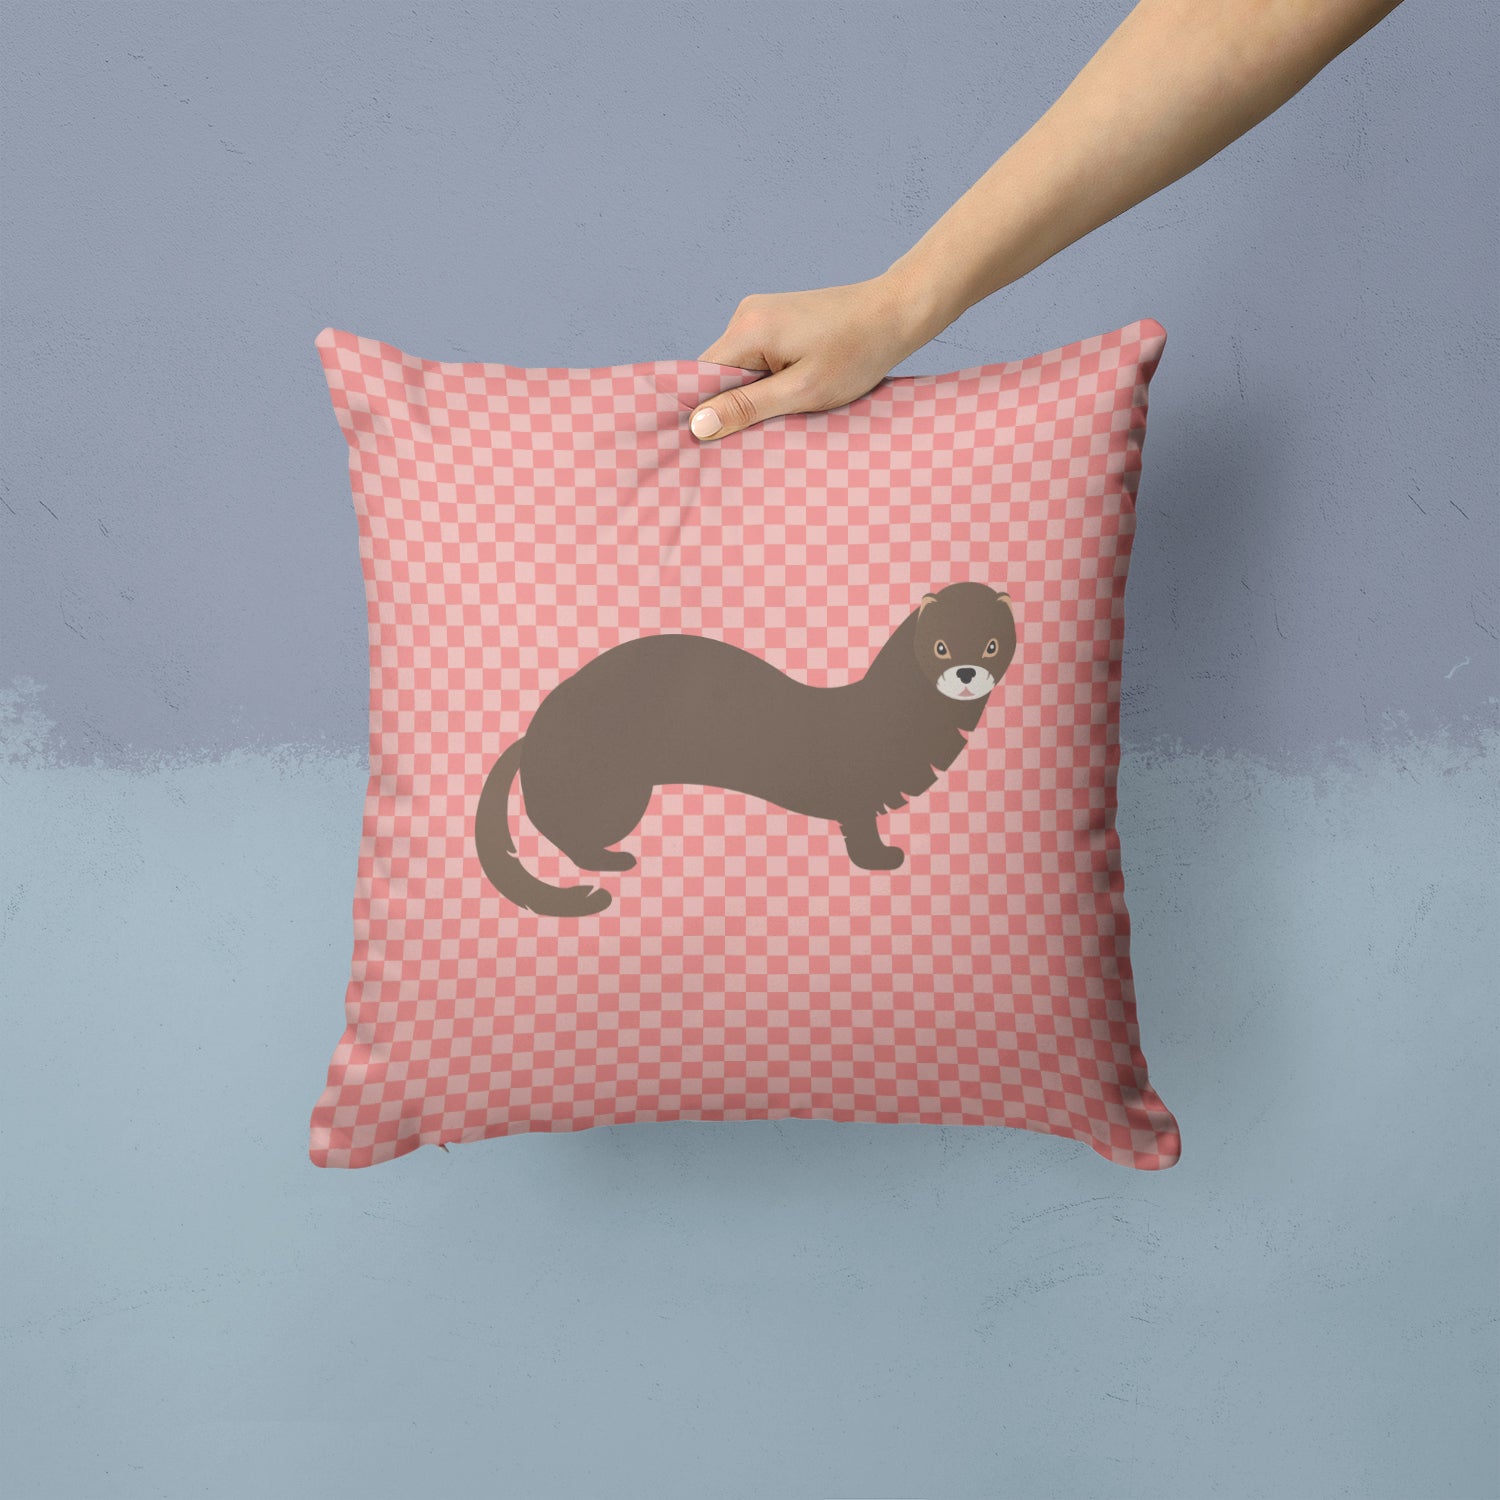 Russian or European Mink Pink Check Fabric Decorative Pillow BB7868PW1414 - the-store.com